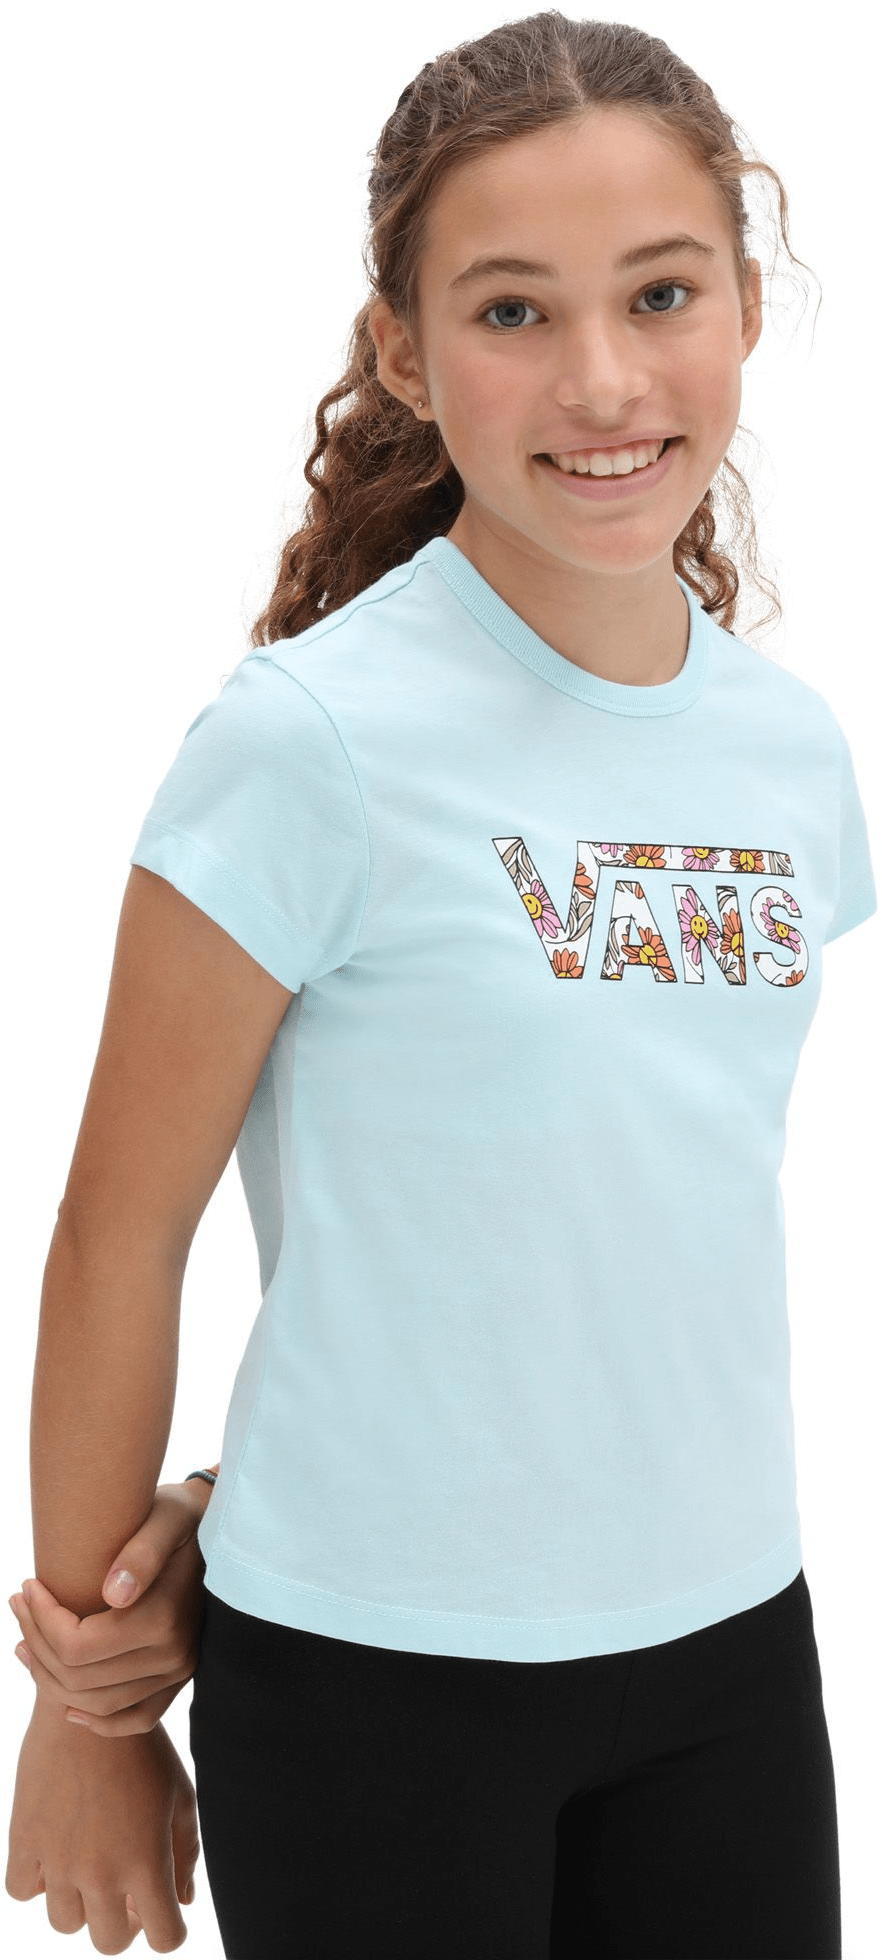 VANS Girl's Elevated Minds Floral Fill Mini T-Shirt Blue Glow Girl's T-Shirts Vans 